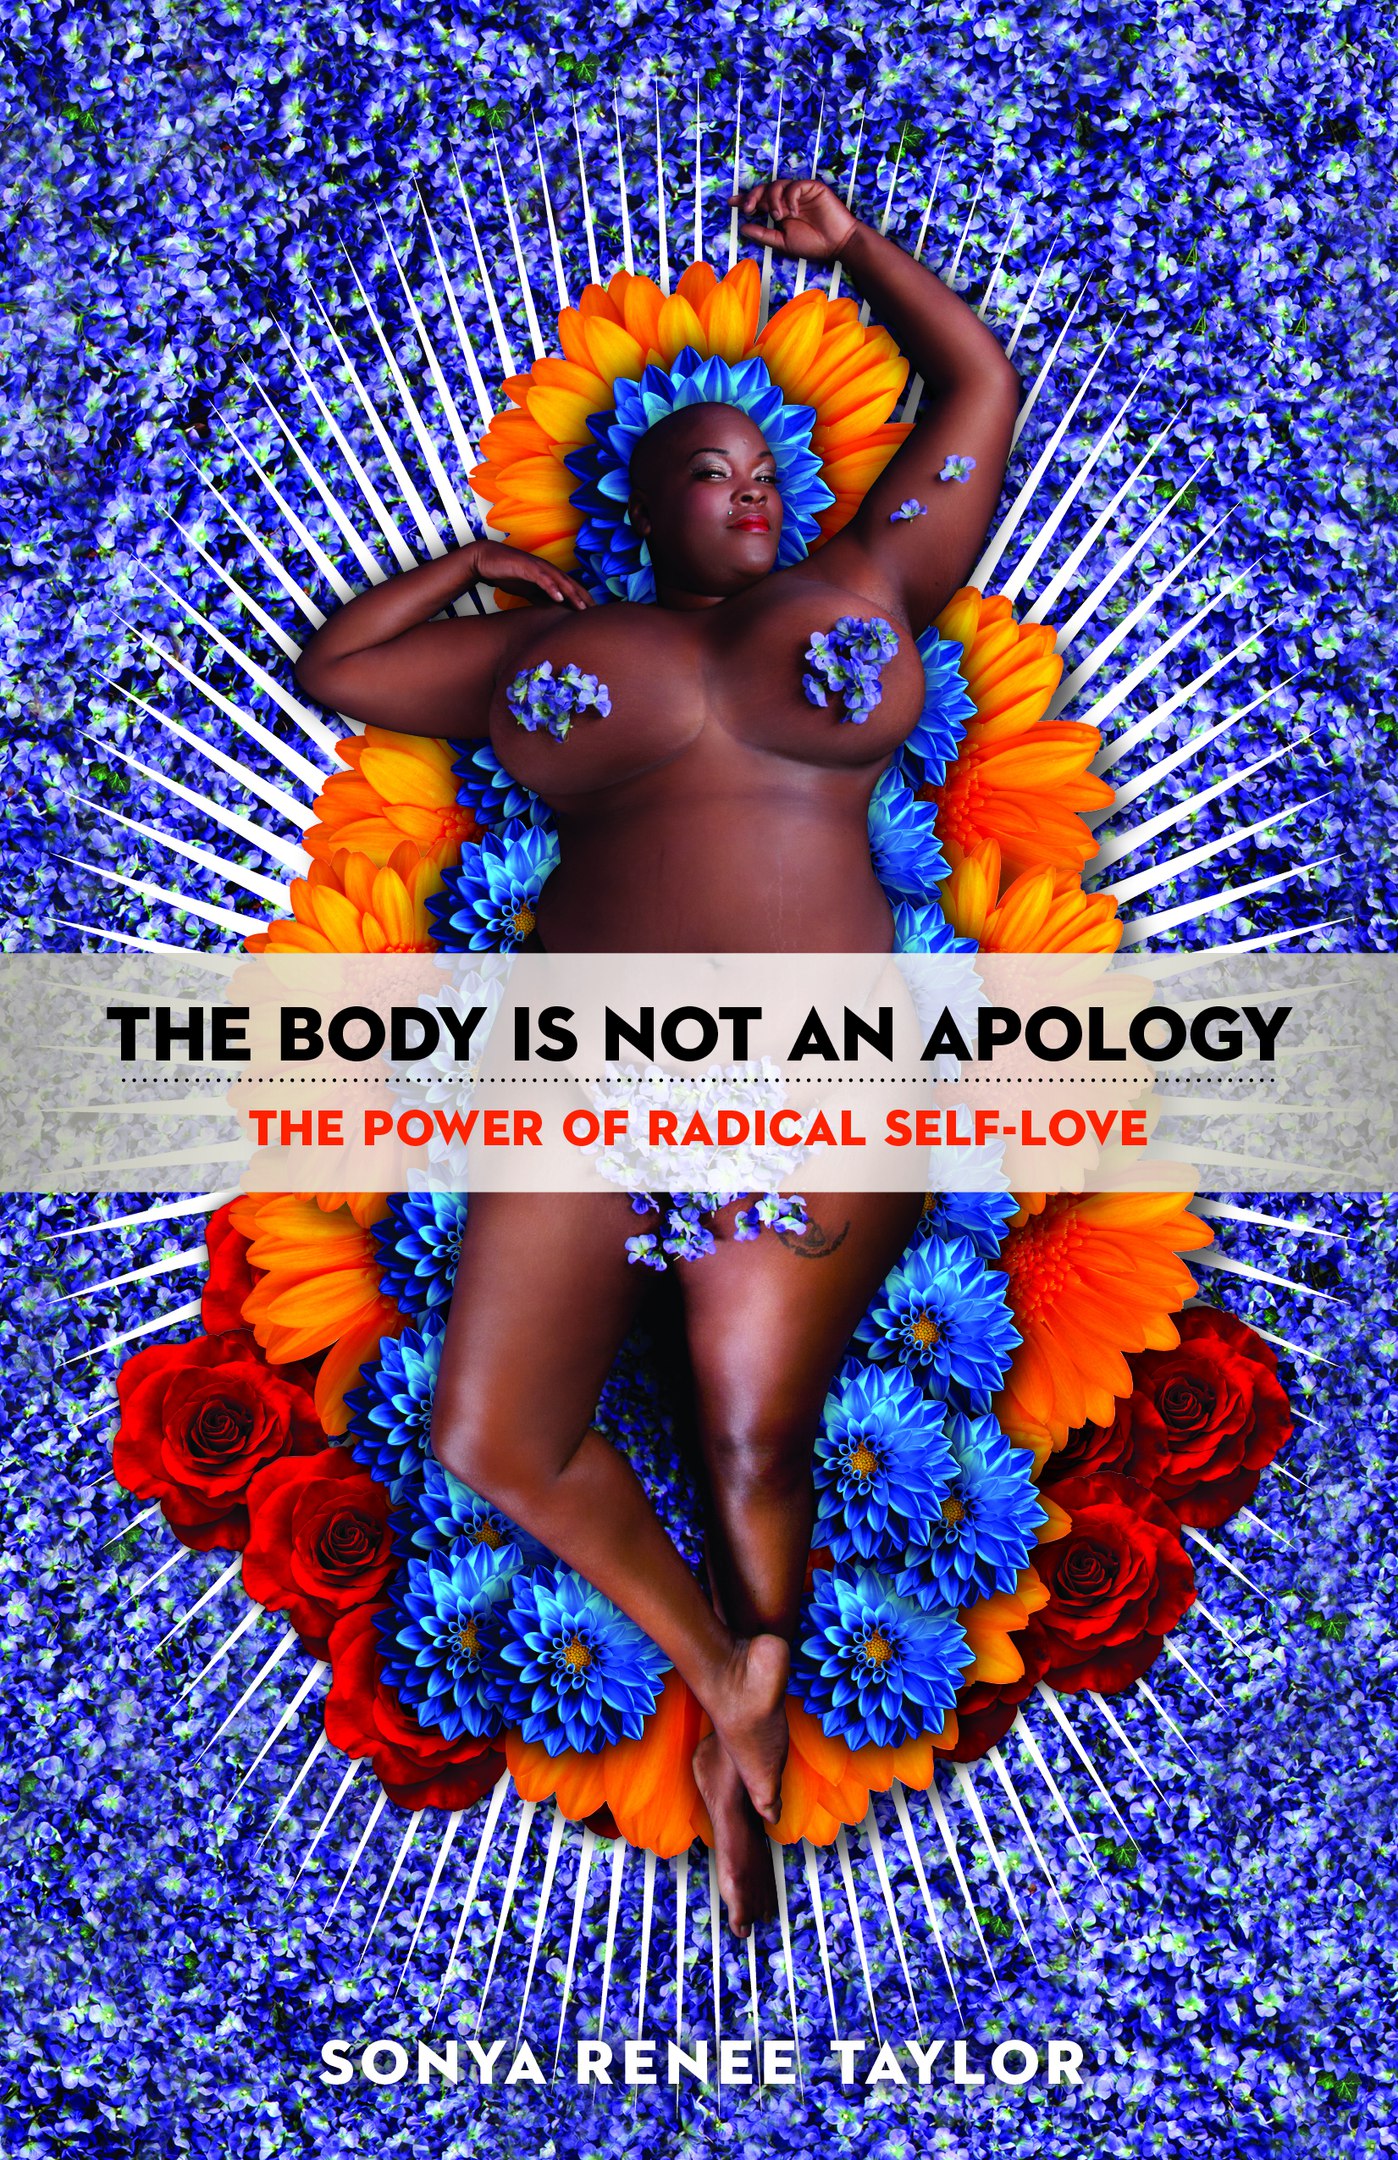 Sonya Renee Taylor – The Body Is Not An Apology